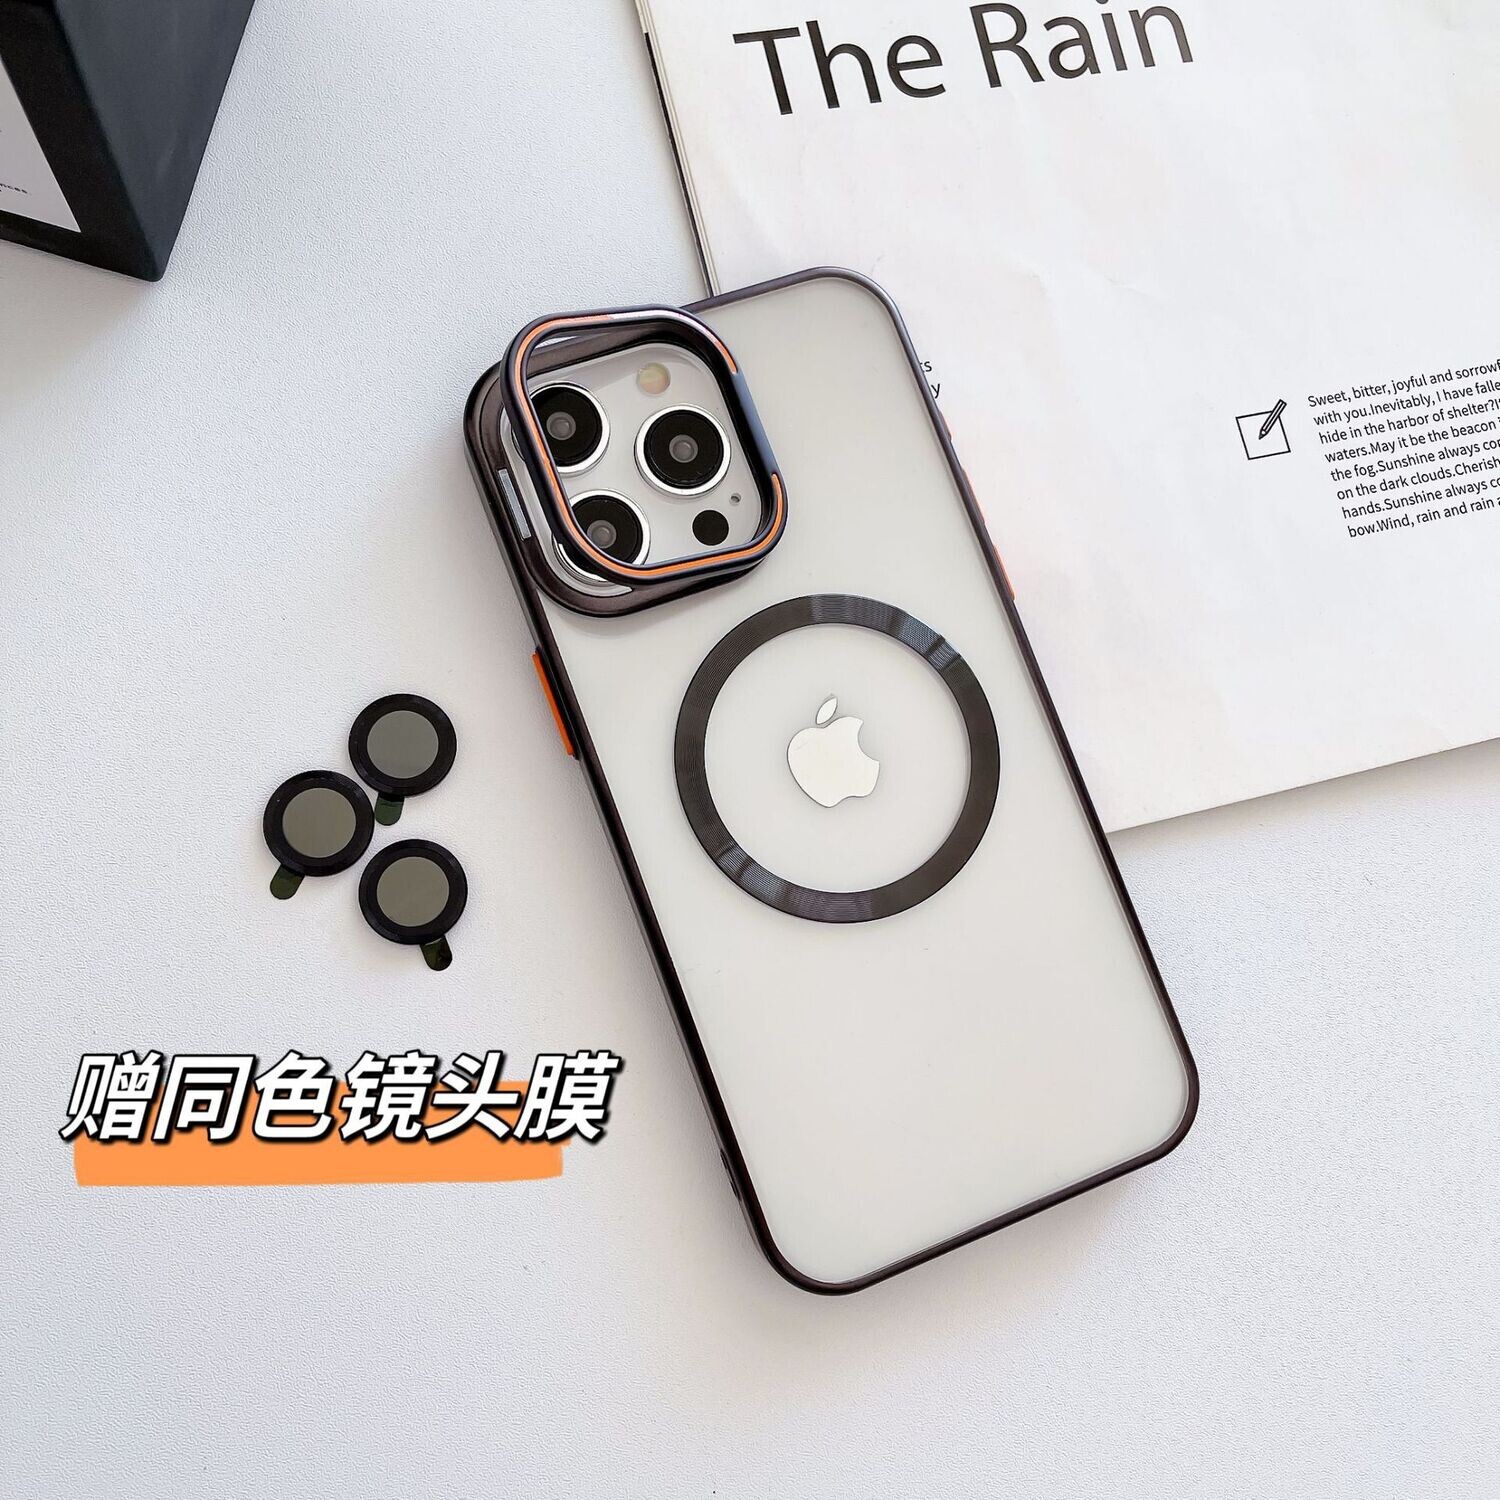 Hollow Stand High Transparency With Same Color Lens Invisible Stand, Color: Magnetic black model [comes with an eagle eye lens], Model: iPhone15promax